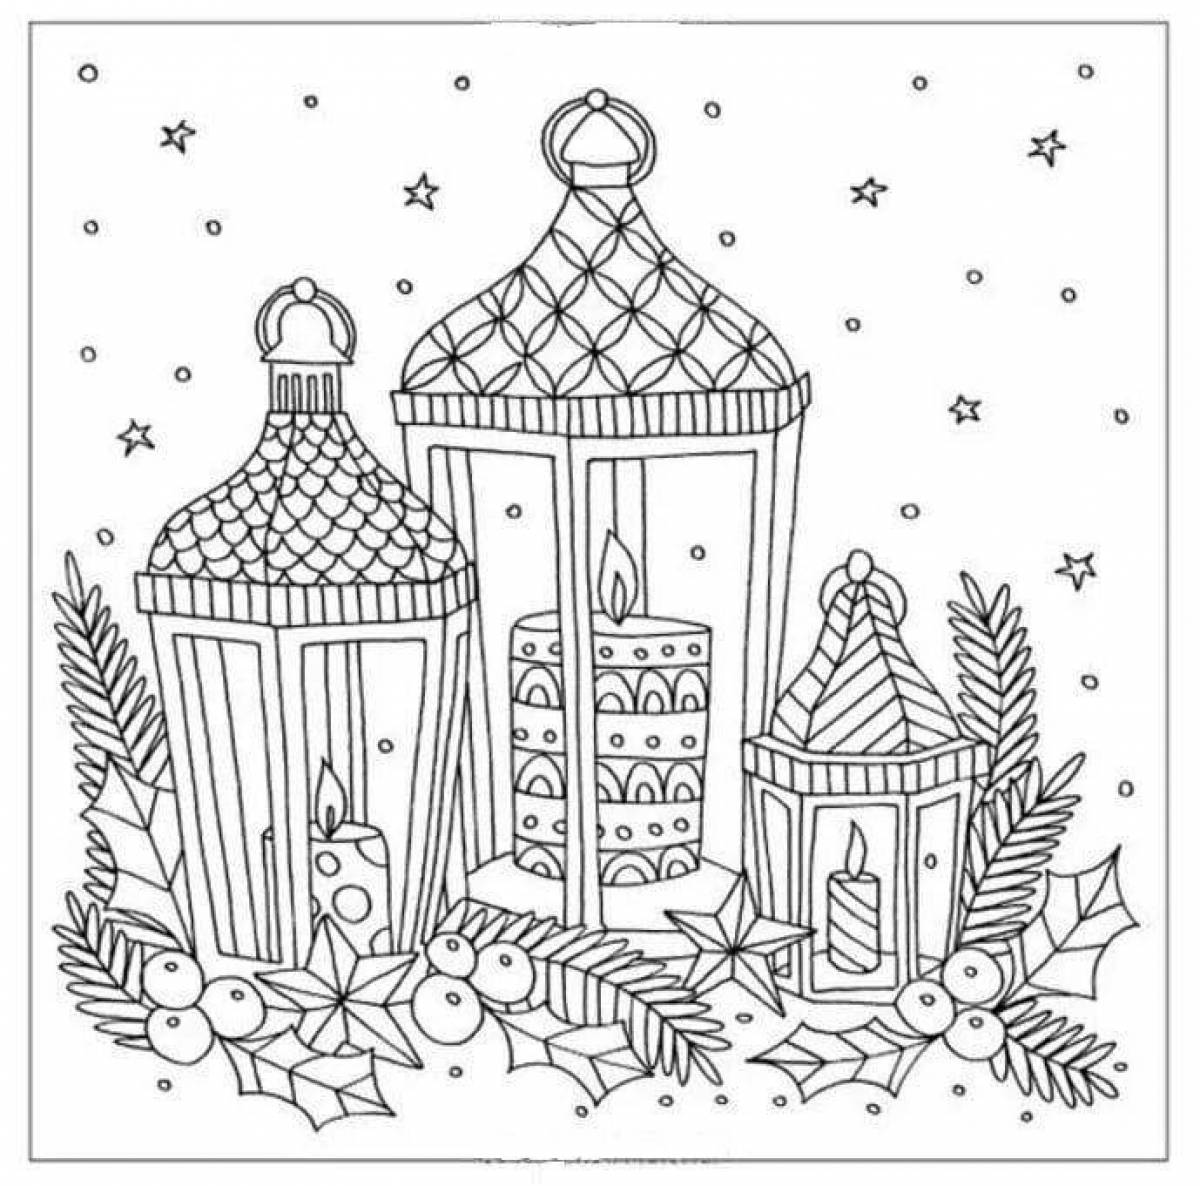 Charming antistress winter coloring book